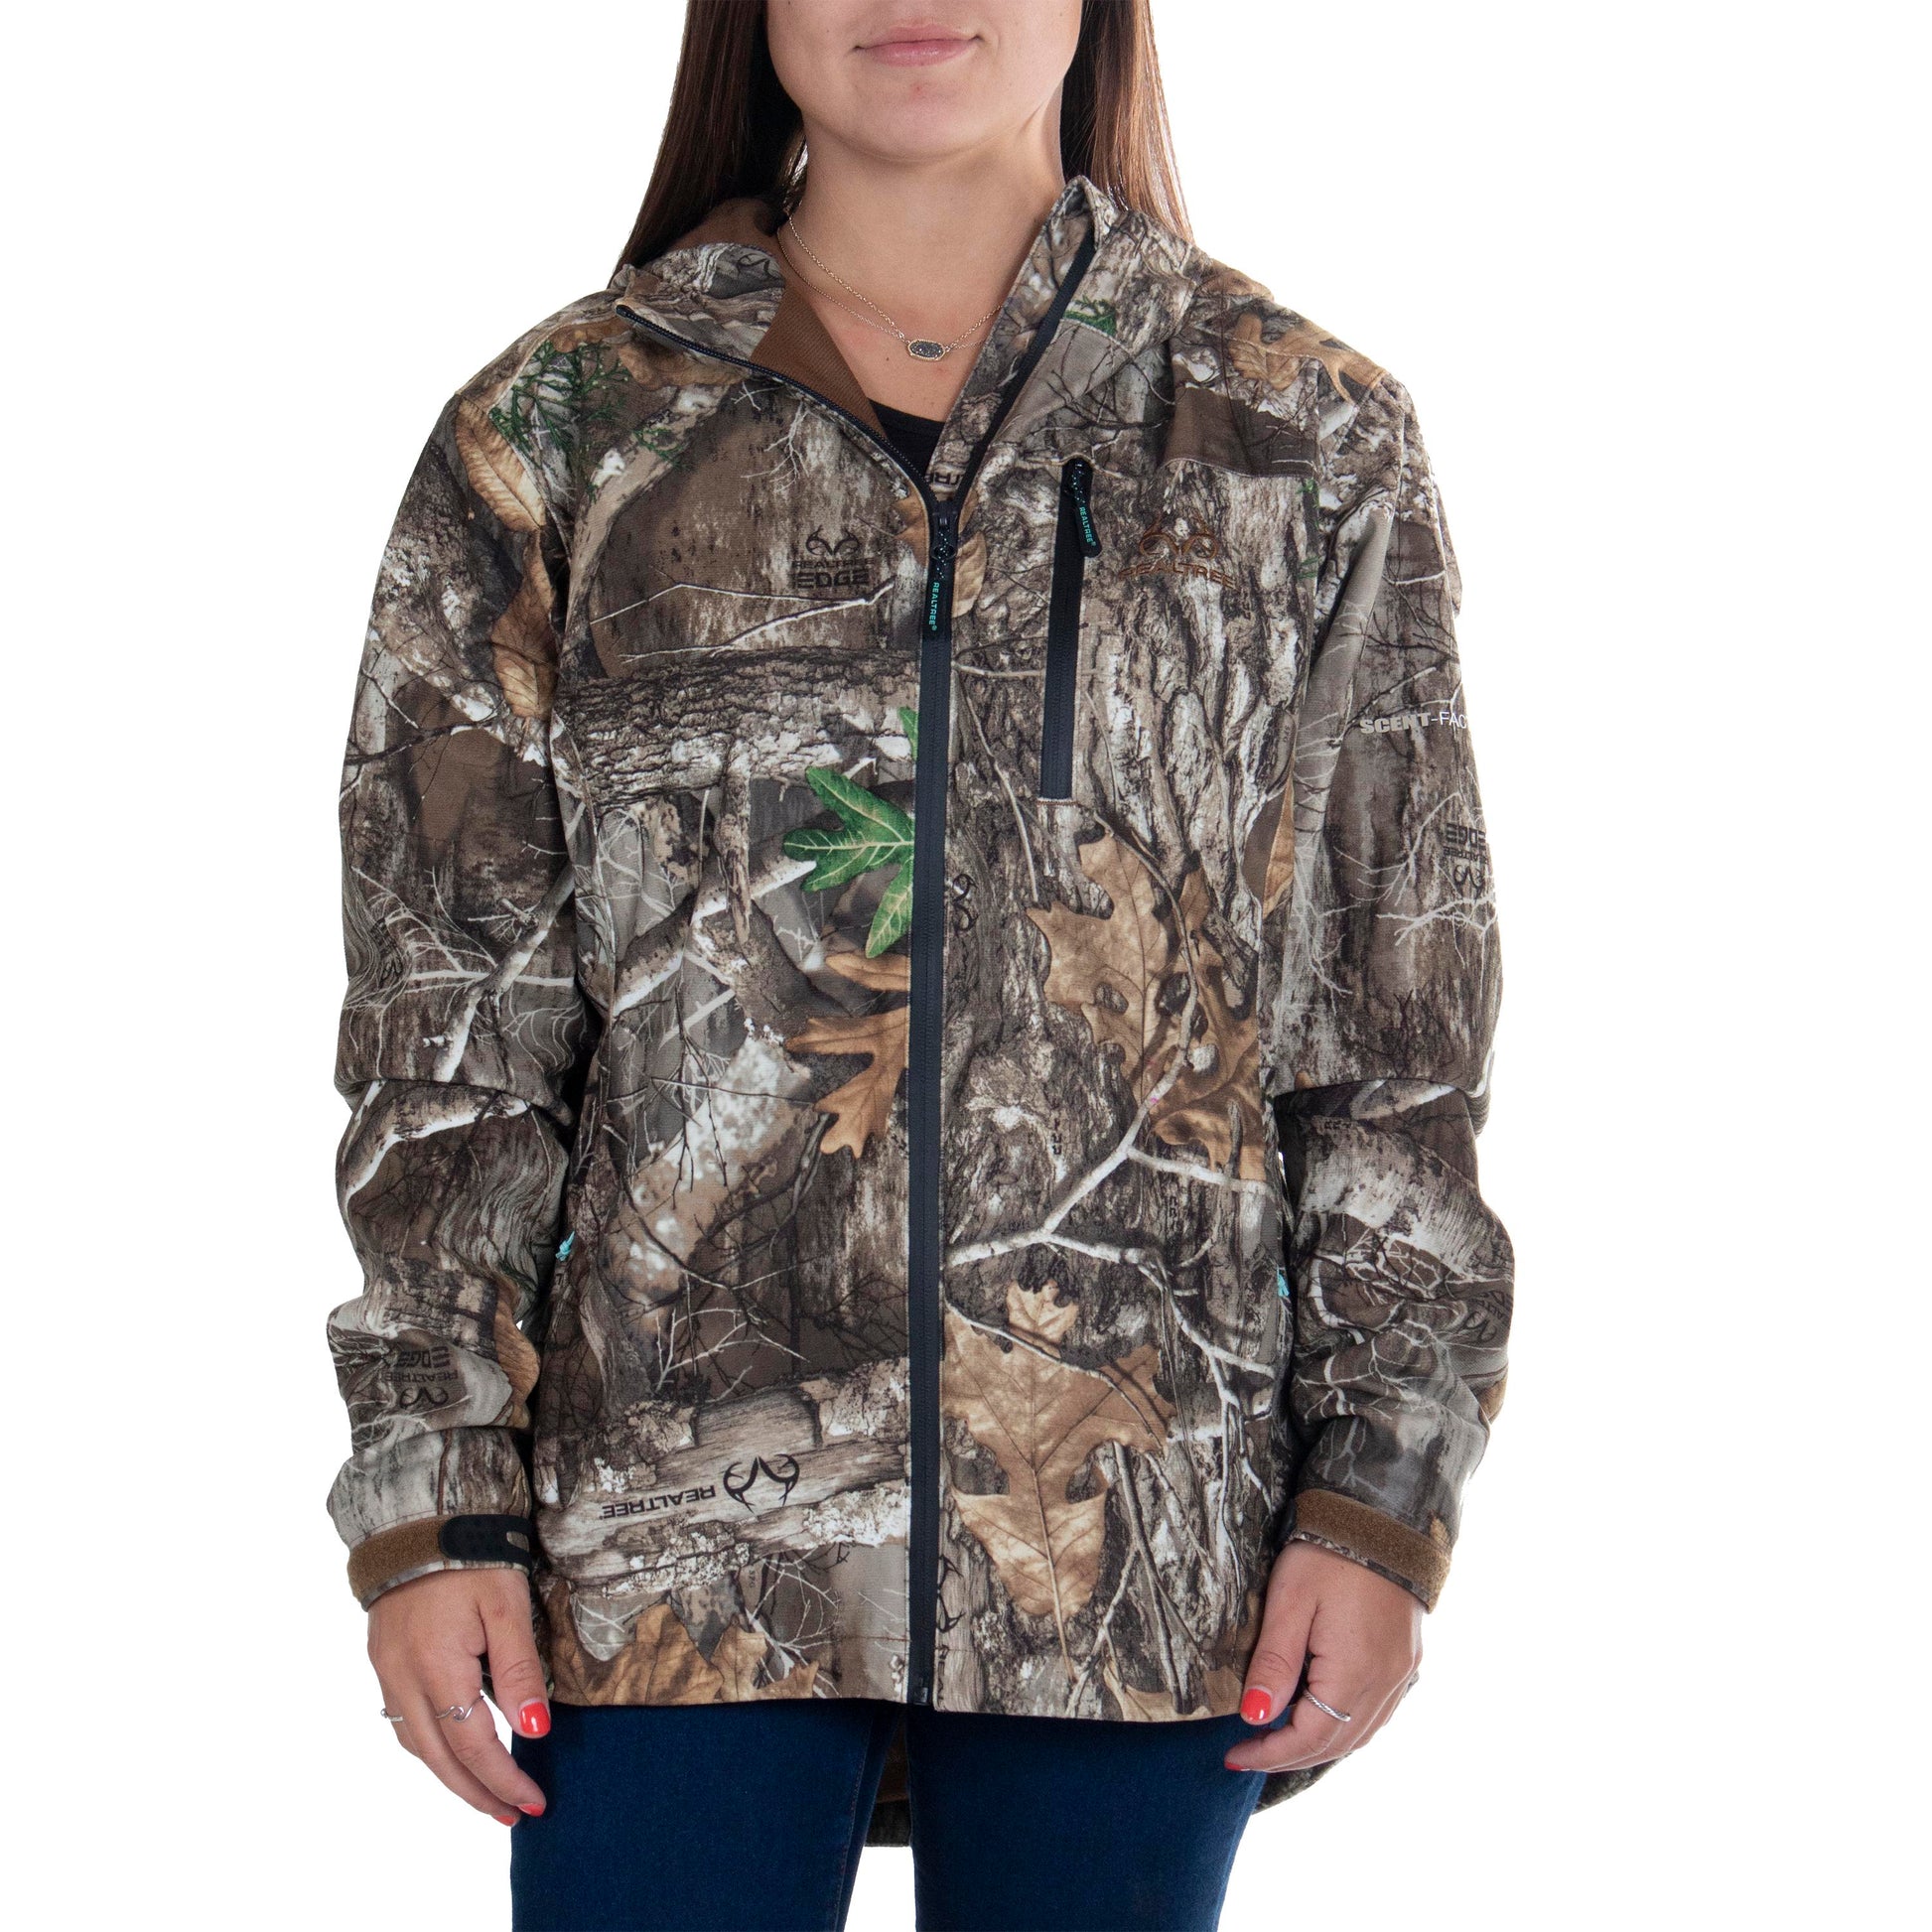 Realtree Men's Scent Factor Hunting Jacket, Realtree Edge, Size Extra Large  